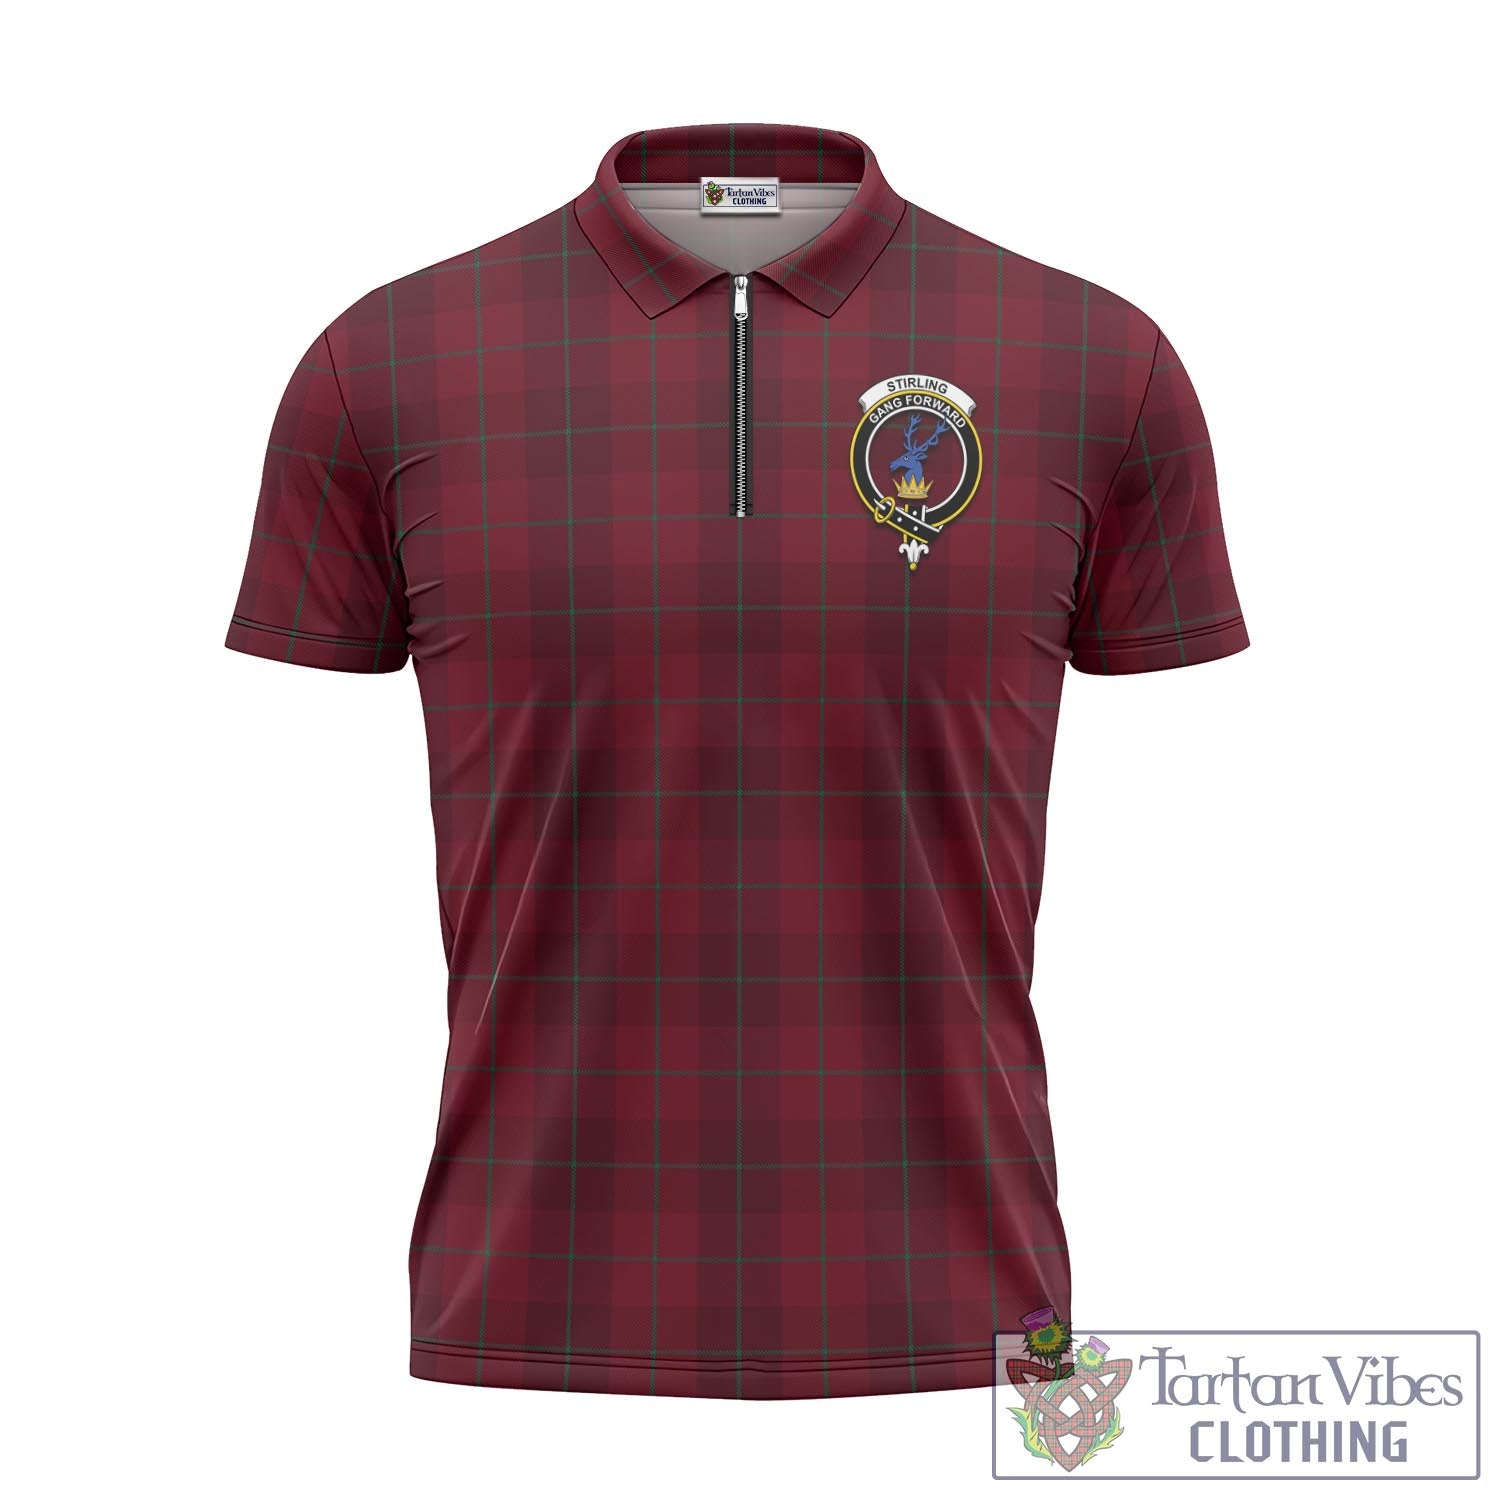 Tartan Vibes Clothing Stirling of Keir Tartan Zipper Polo Shirt with Family Crest